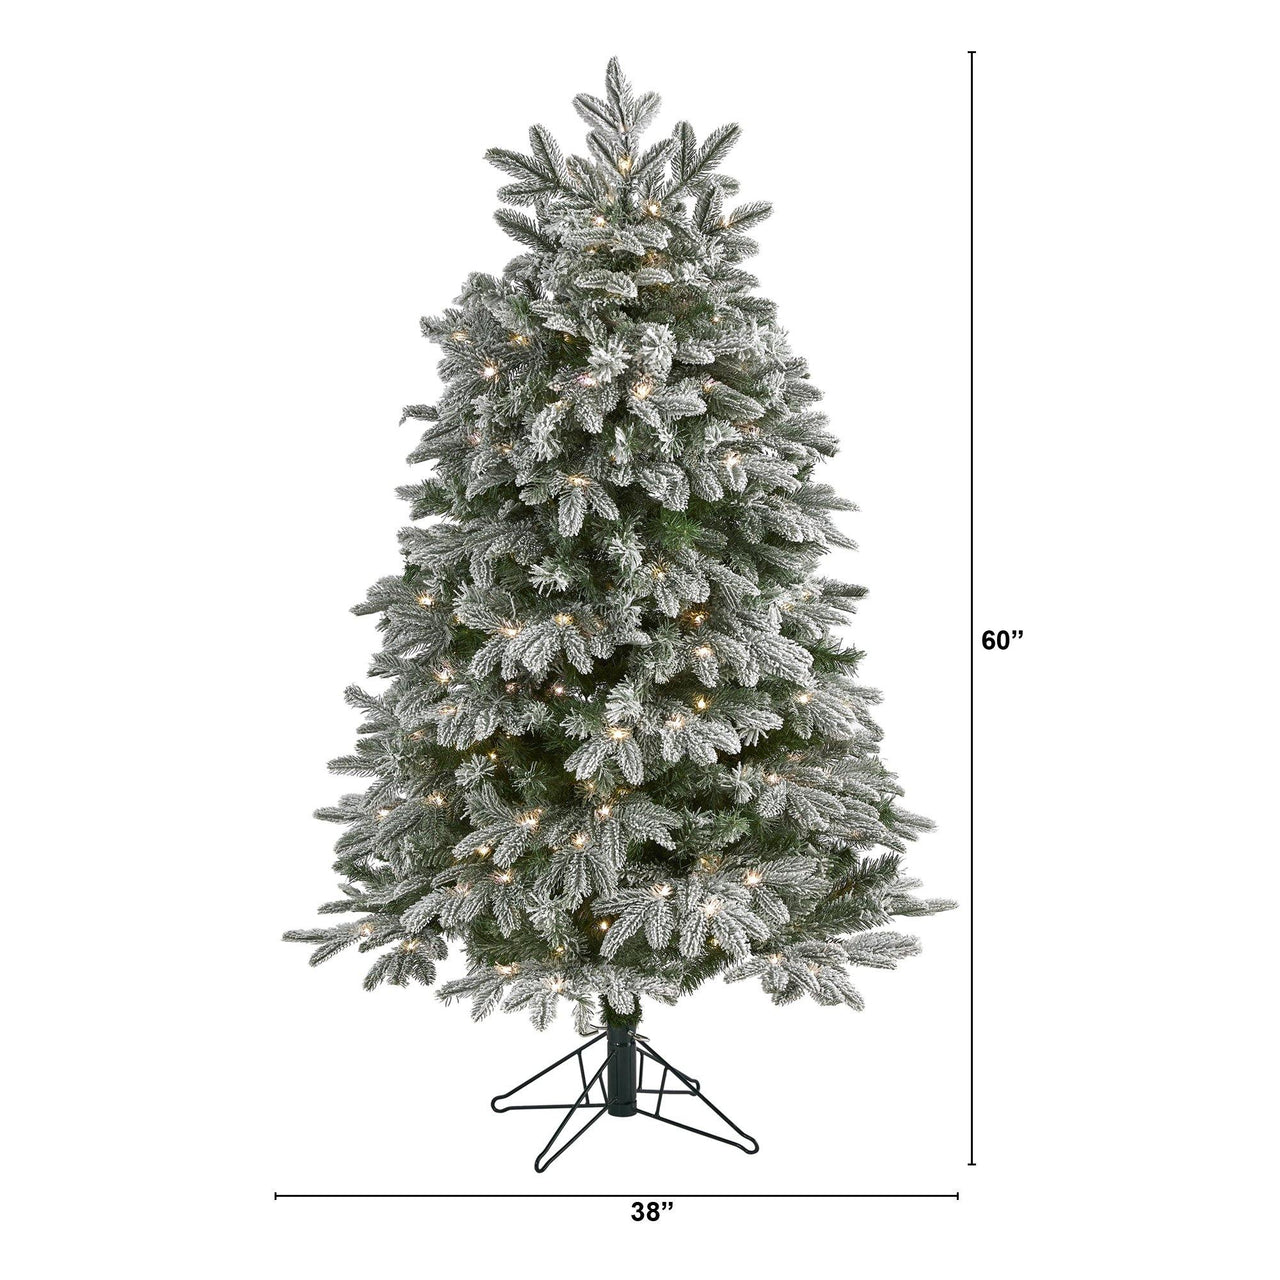 5' Flocked Colorado Mountain Fir Artificial Christmas Tree with 300 Warm White Microdot (Multifunction) LED Lights with Instant Connect Technology and 511 Bendable Branches - The Fox Decor